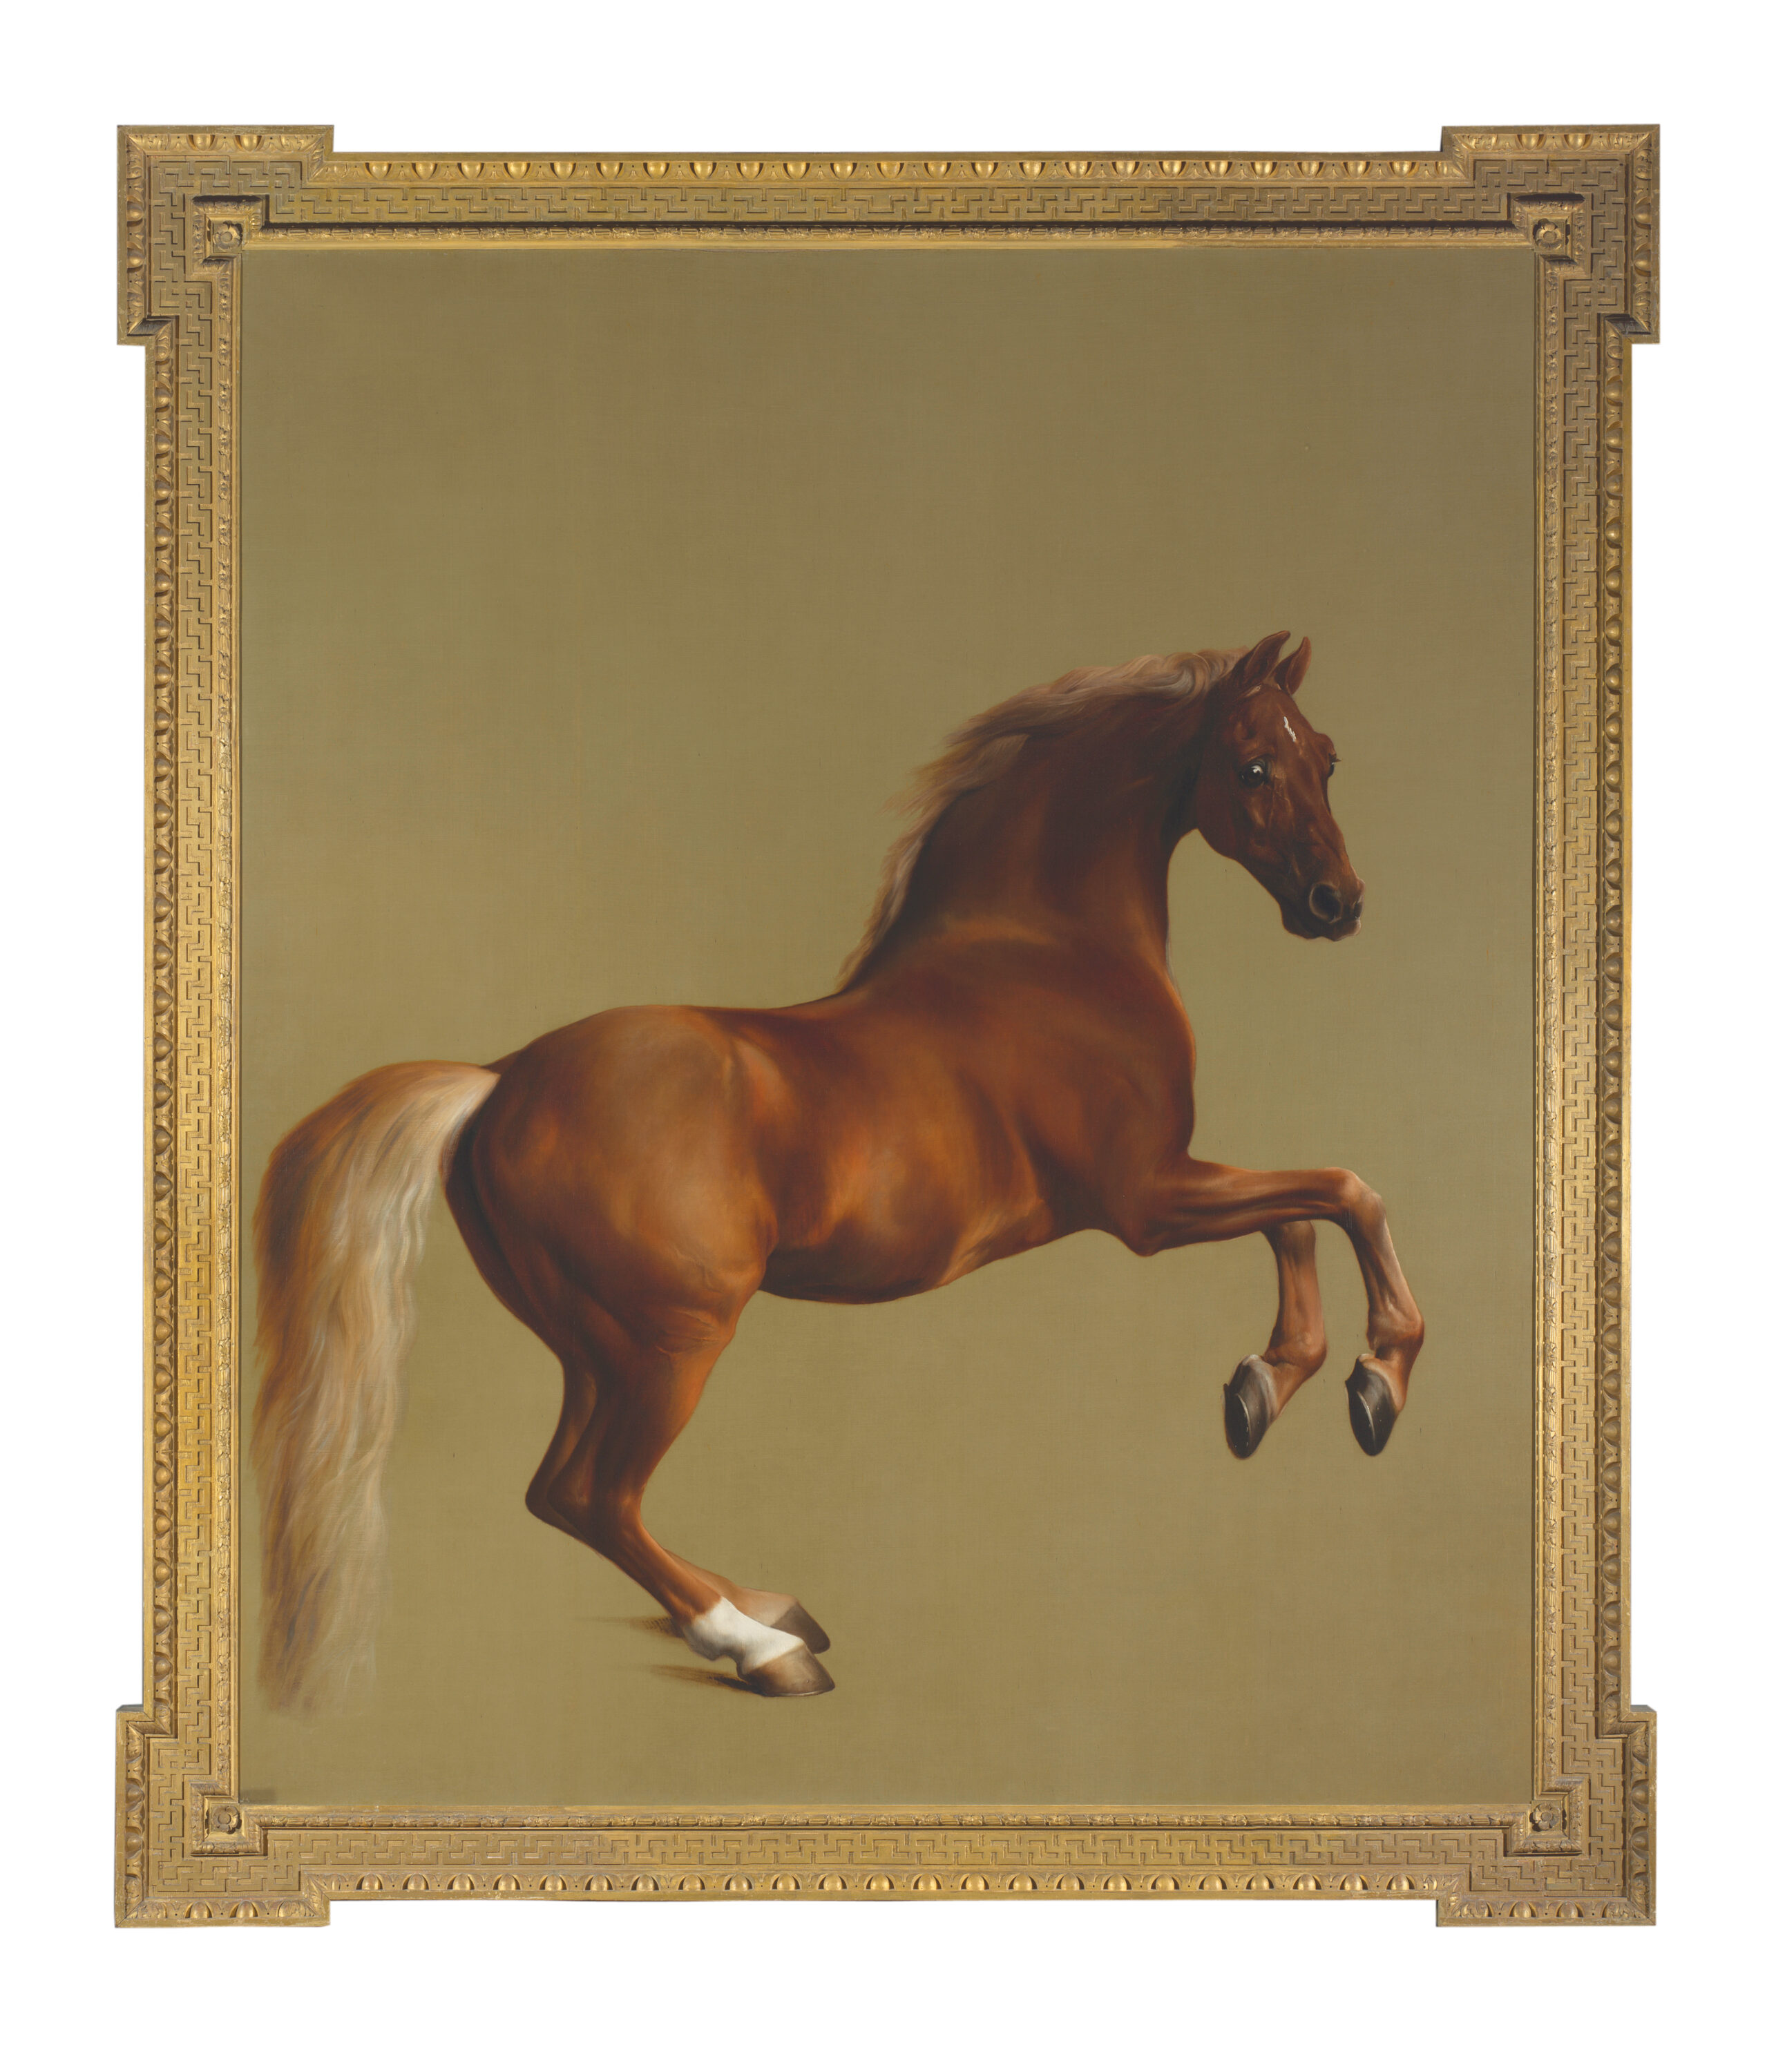 Horses with George Stubbs - Books - Living Paintings